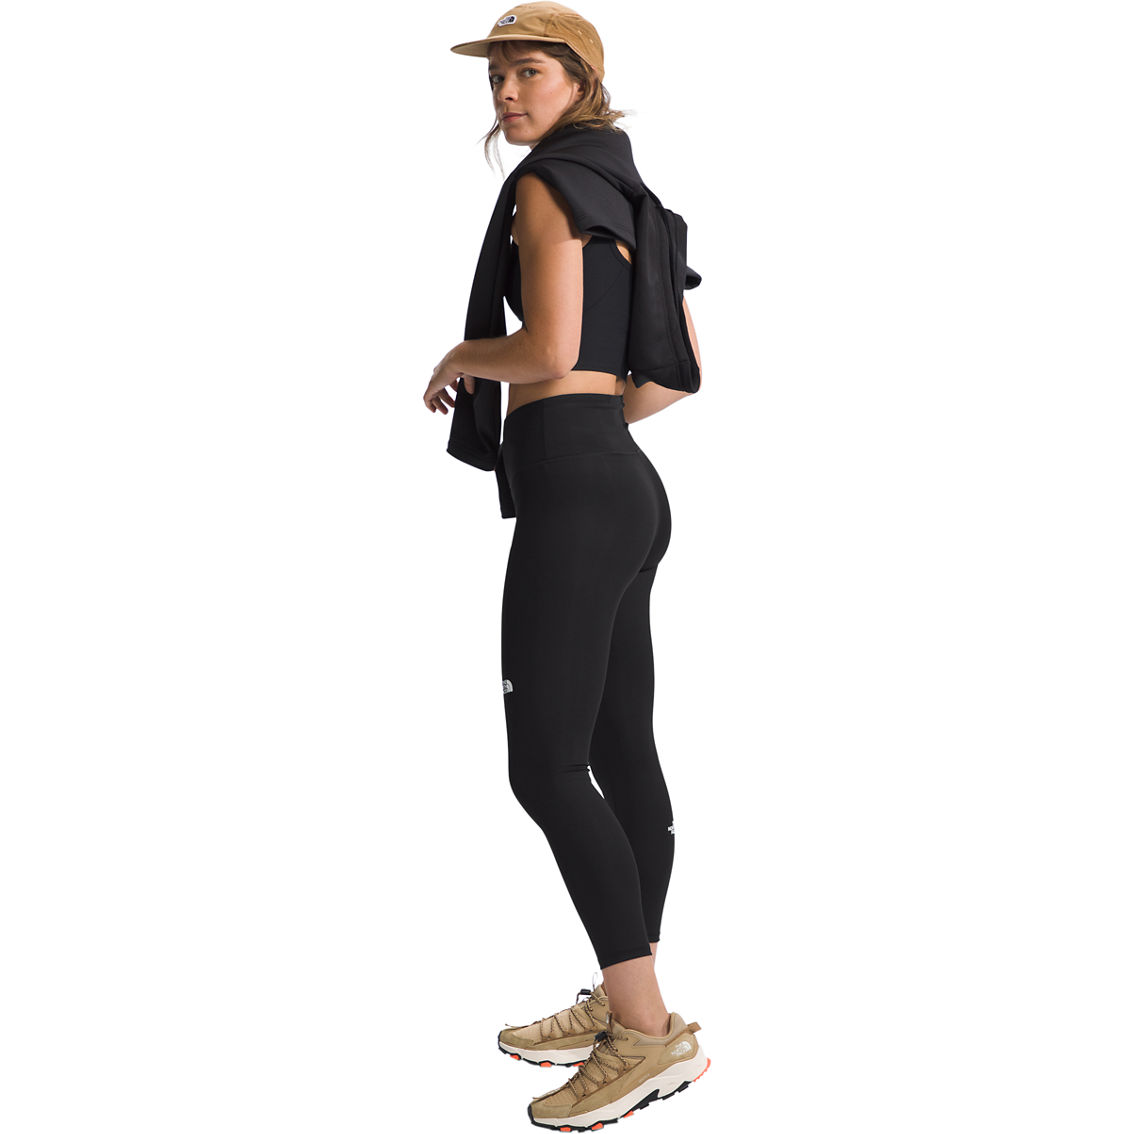 The North Face Elevation Flex 25 in. Leggings - Image 4 of 6